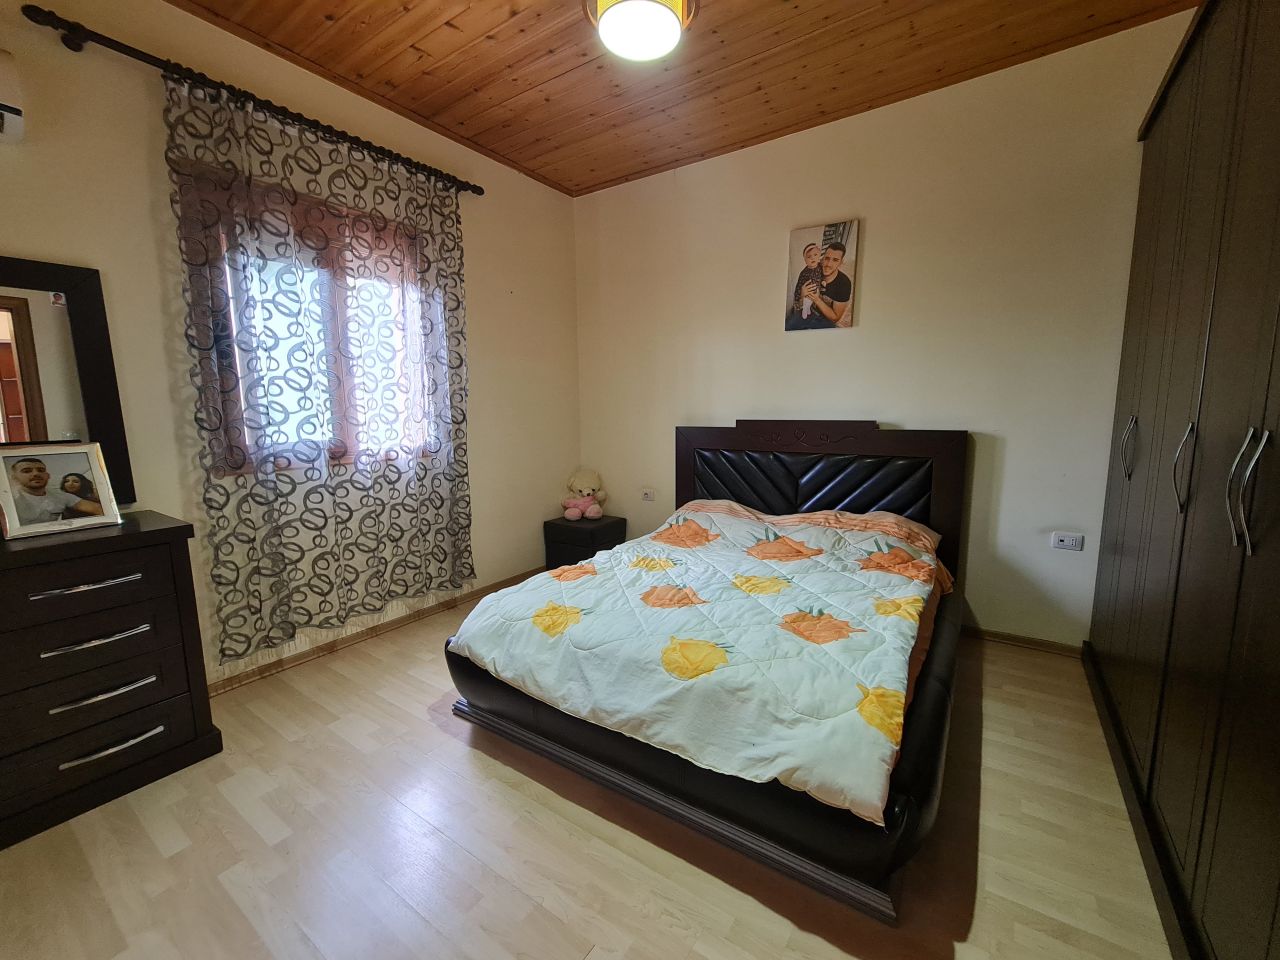 PRIVATE HOUSE FOR SALE IN VLORE ALBANIA